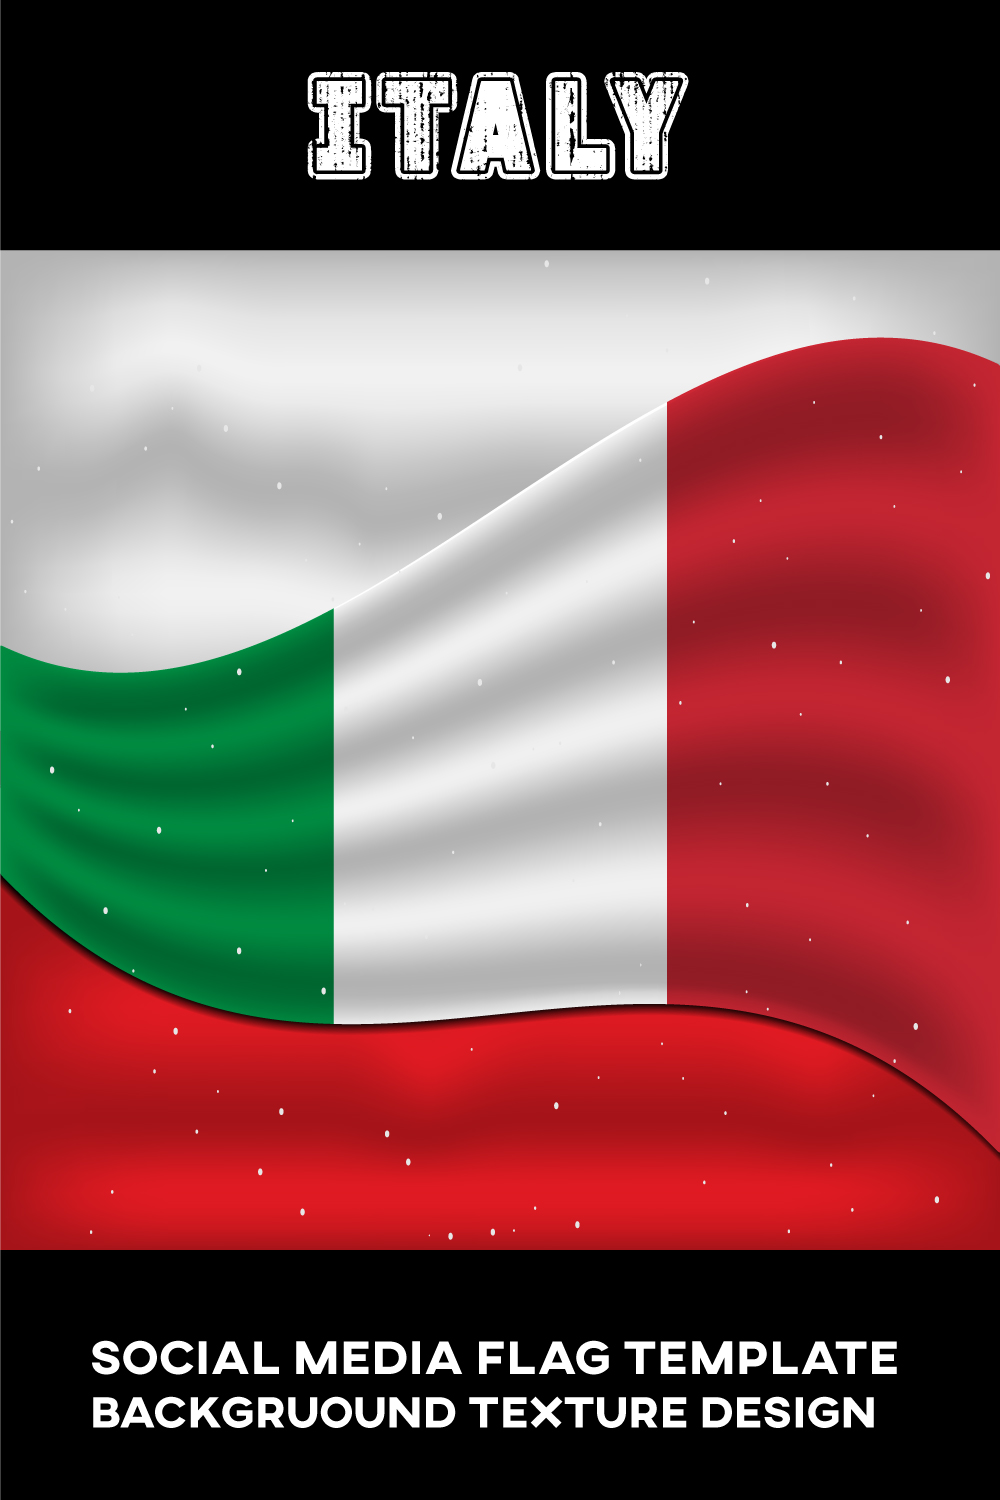 Gorgeous image of the flag of Italy.